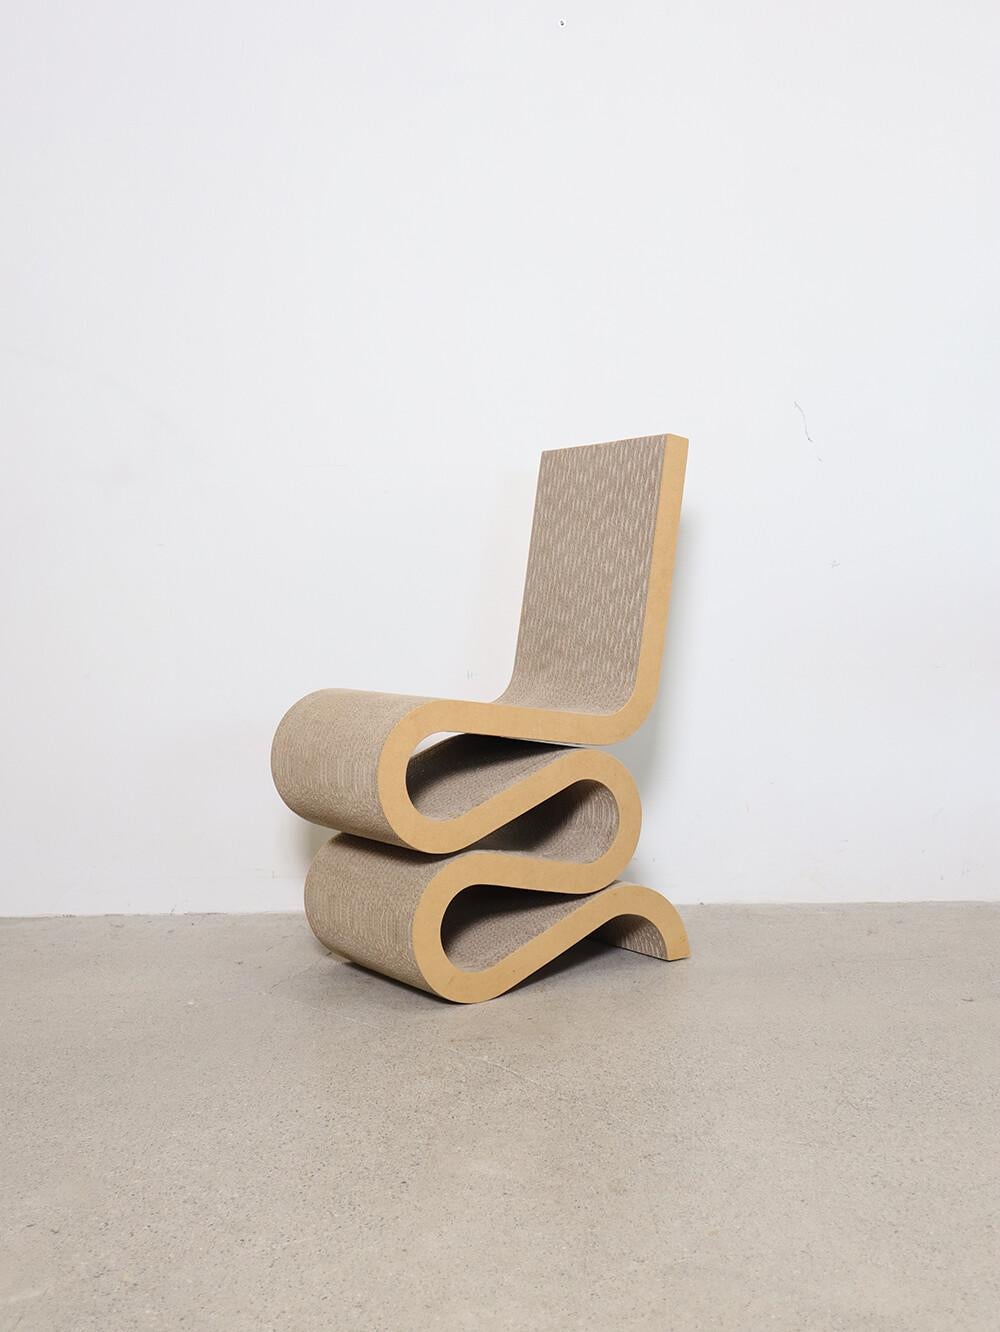 Wiggle Chair by Frank Gehry for Vitra
